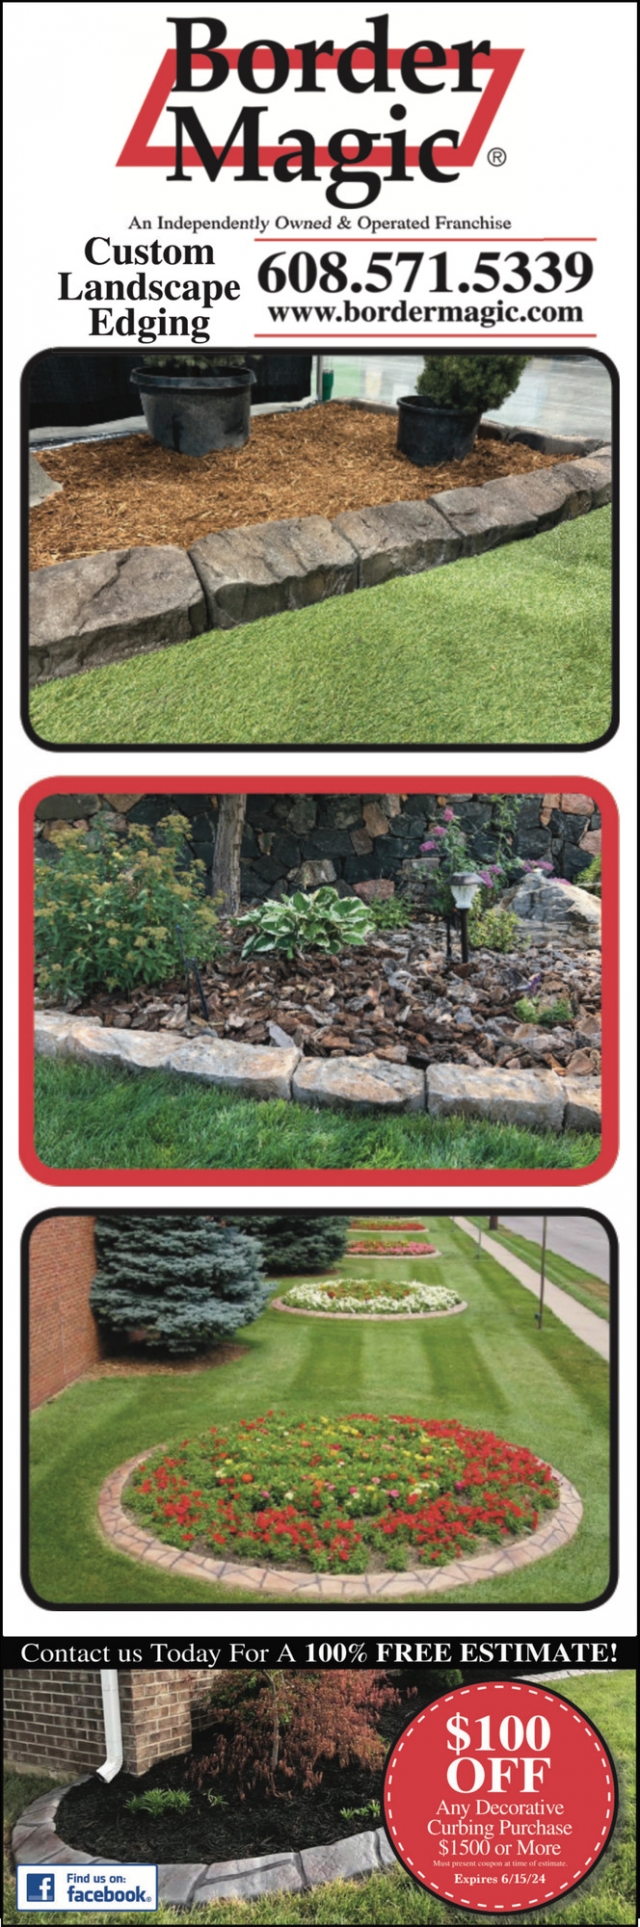 Custom Landscape Edging for Your Home or Business, Border Magic by BB Landscaping, Waunakee, WI